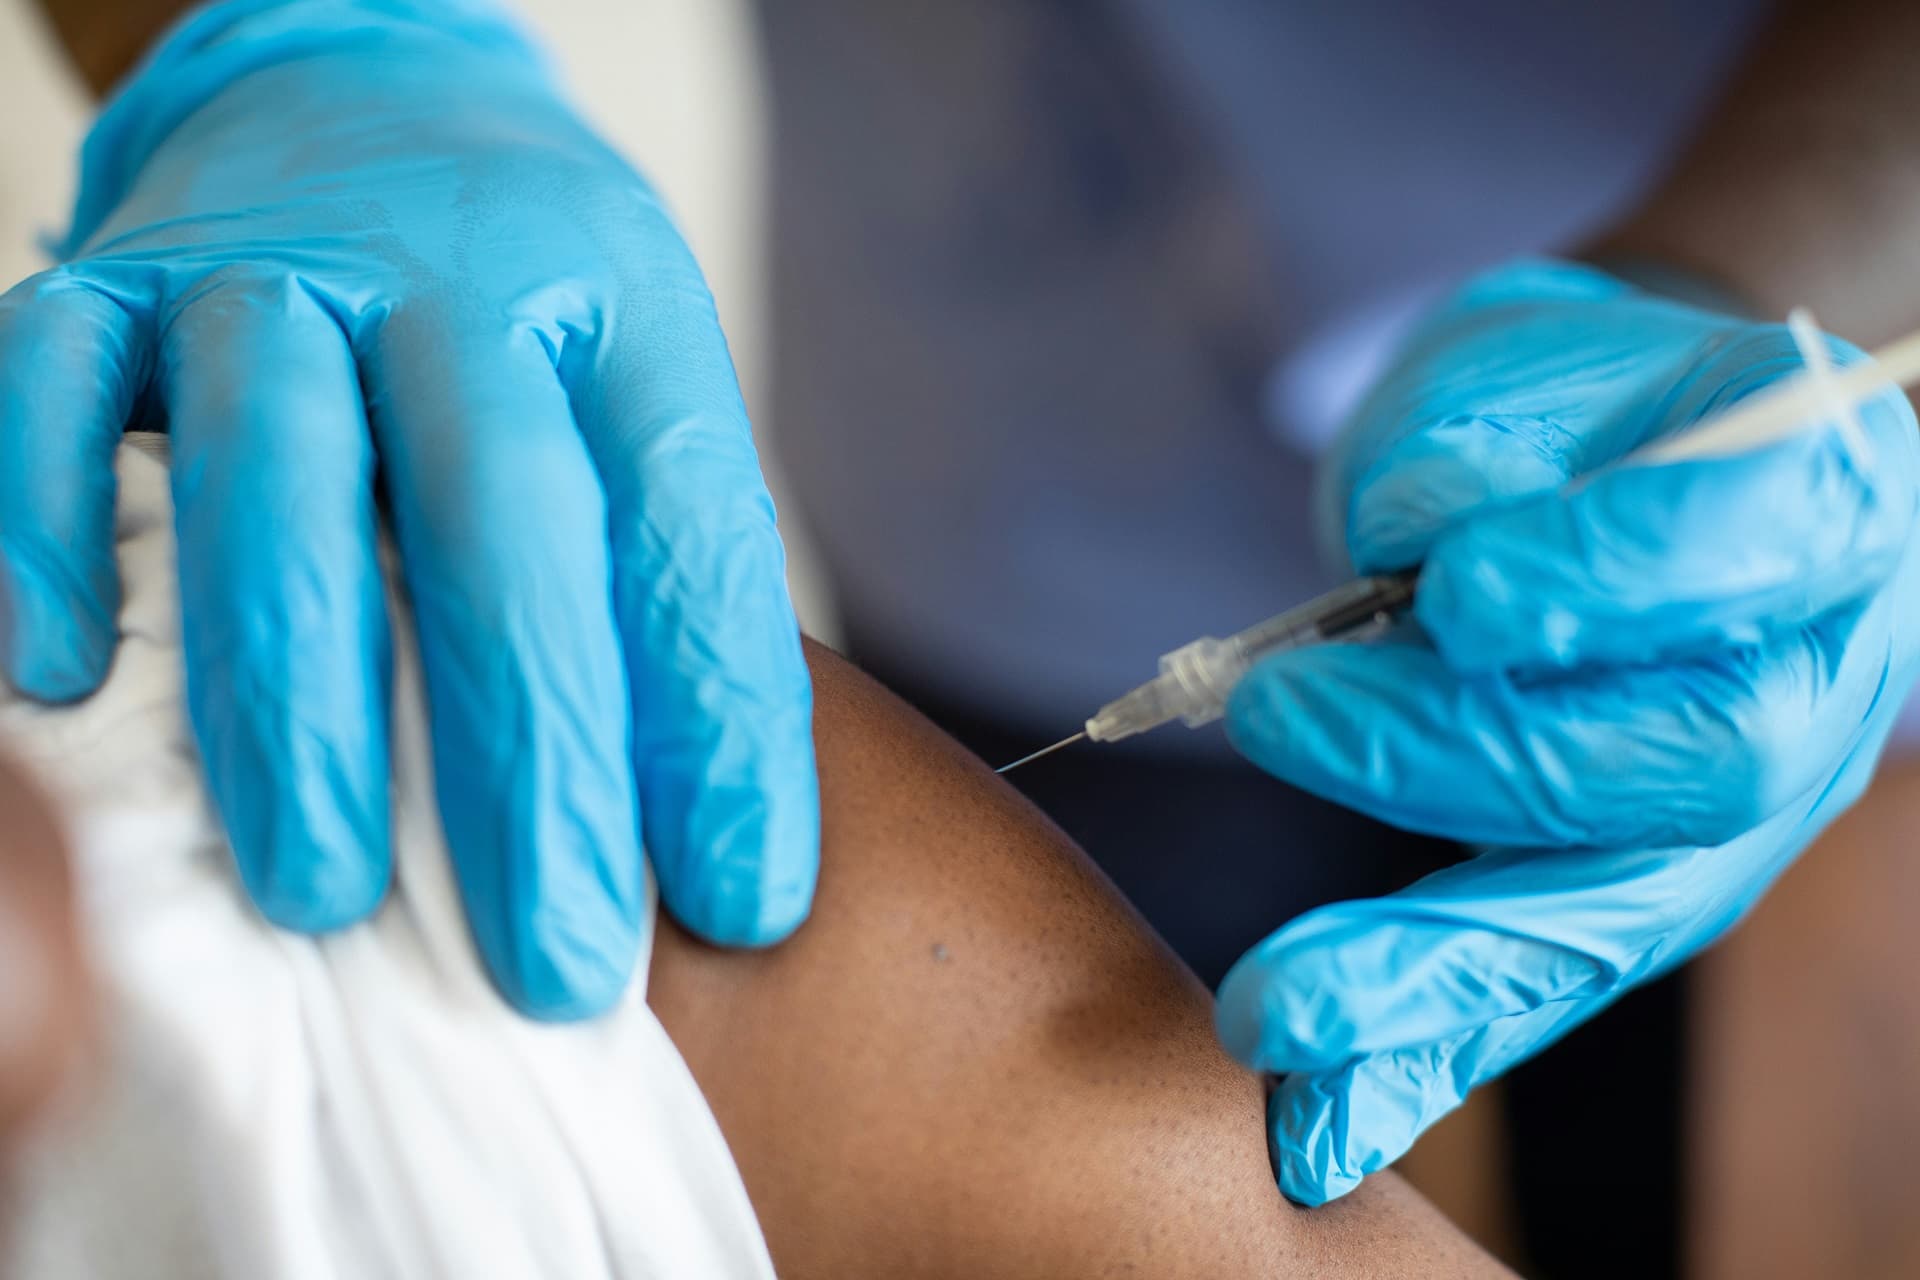 a doctor is about to inject medicine into a patient's upper arm